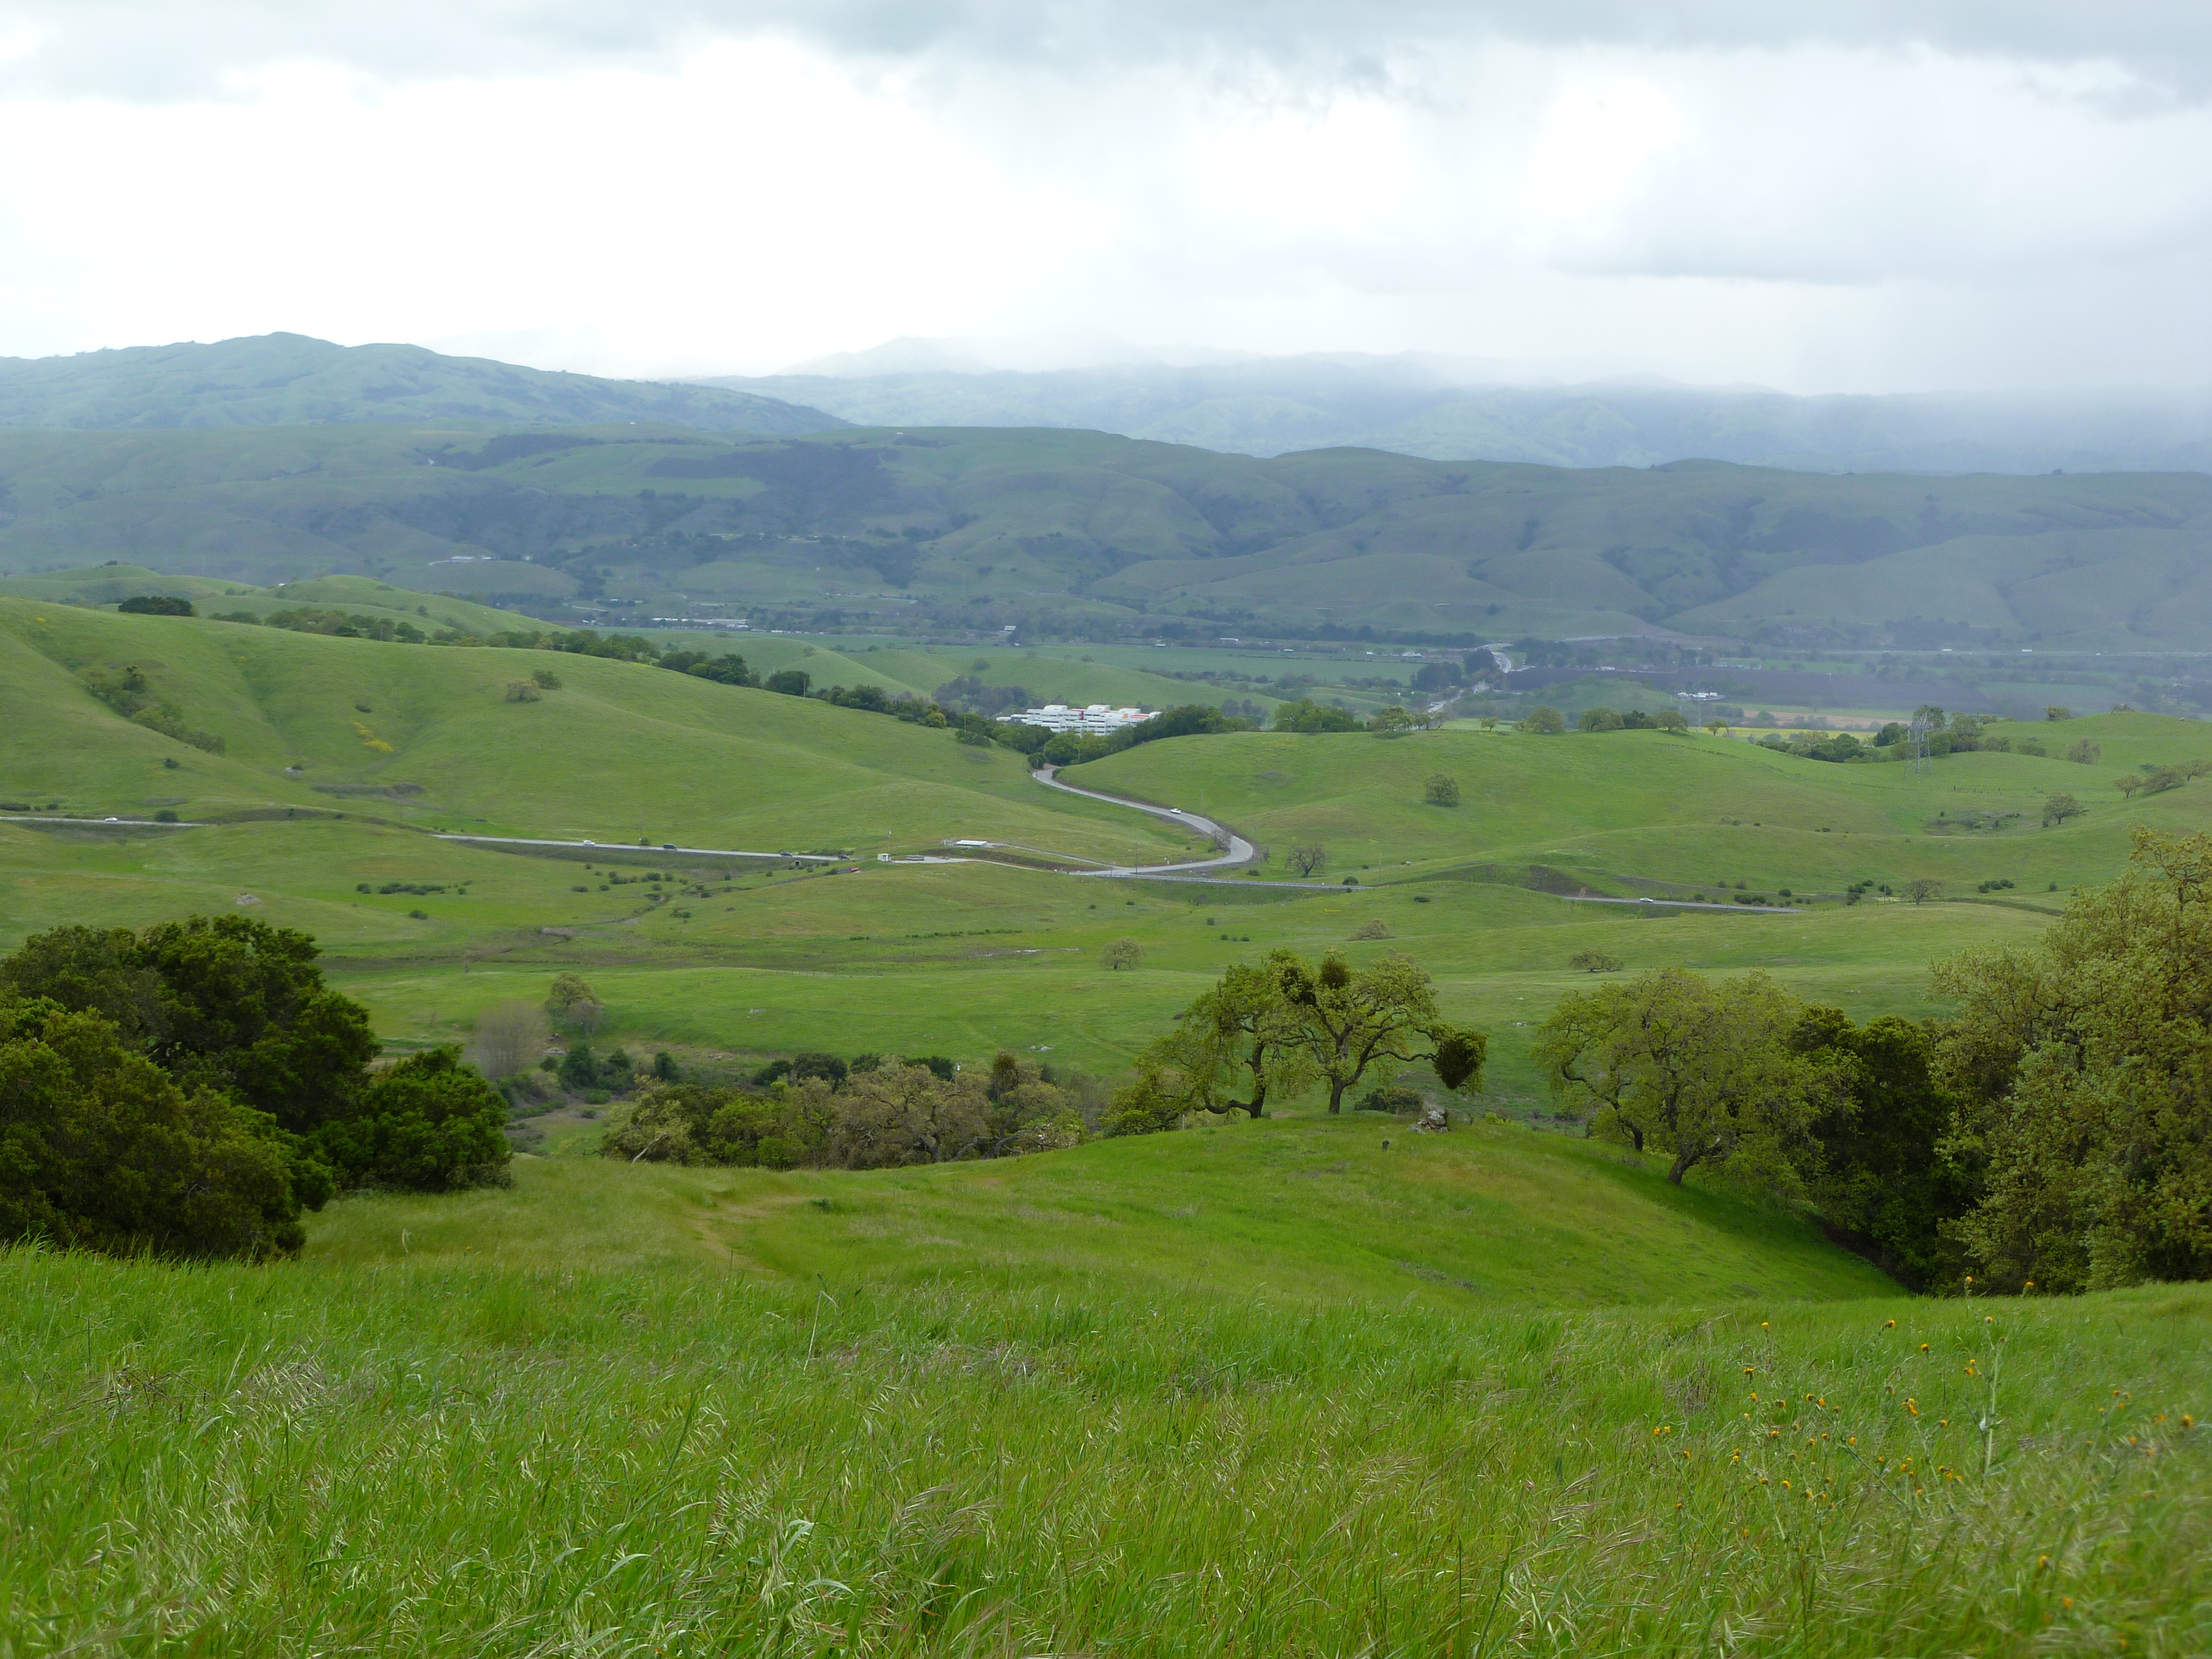 Calero Park showing green hills in foreground and in the distance on a cloudy day